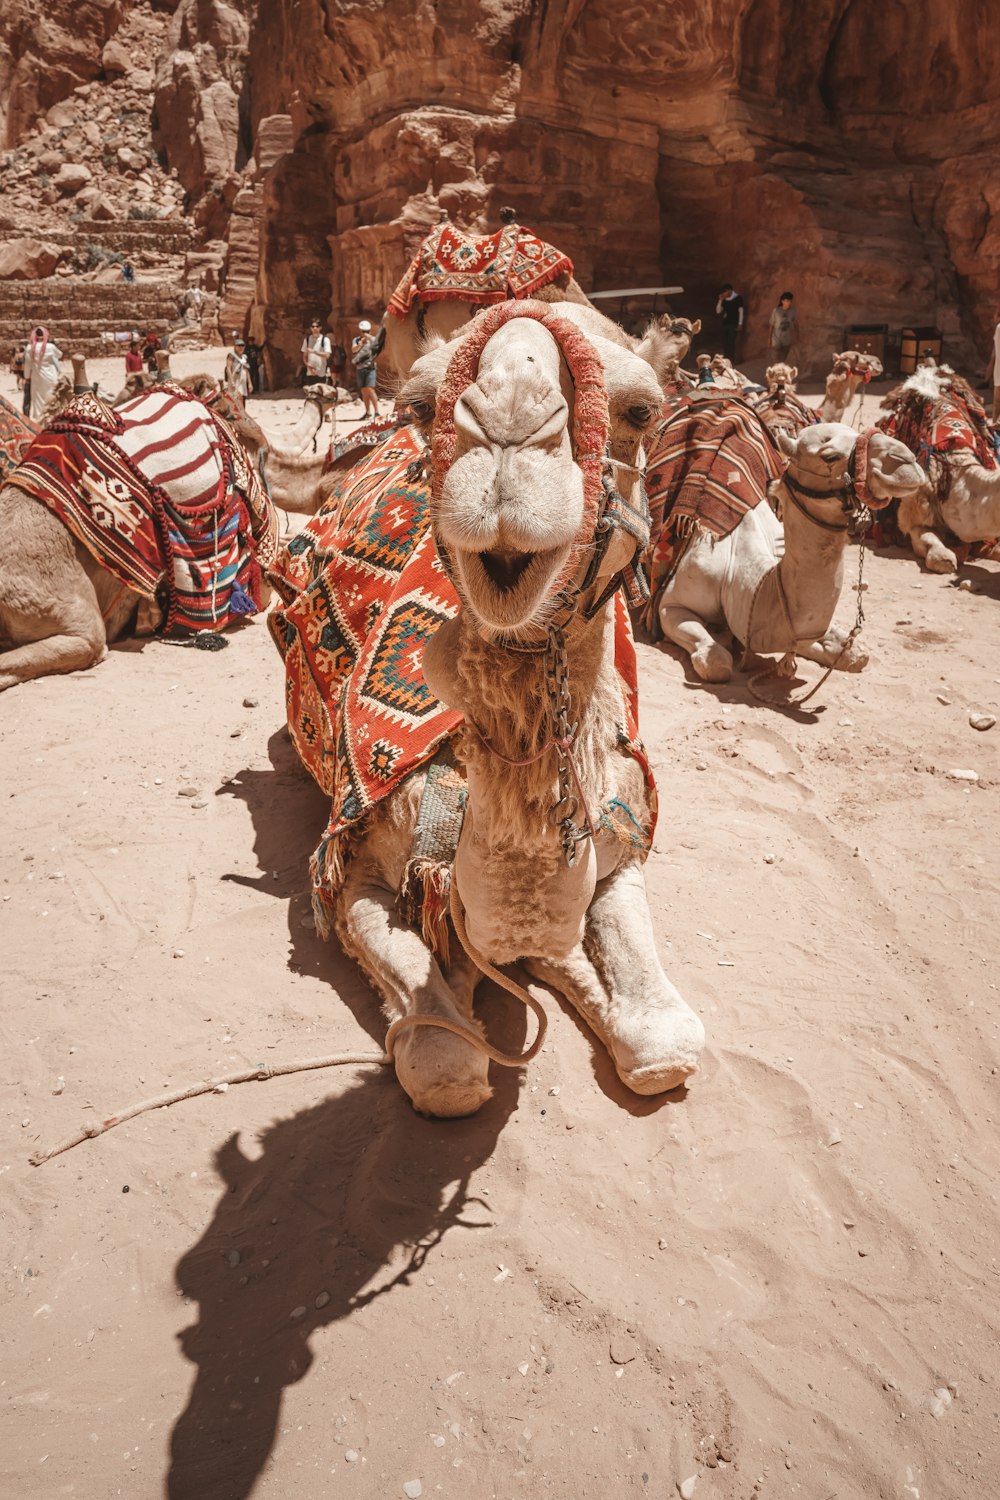 a camel with a saddle on its back in the desert